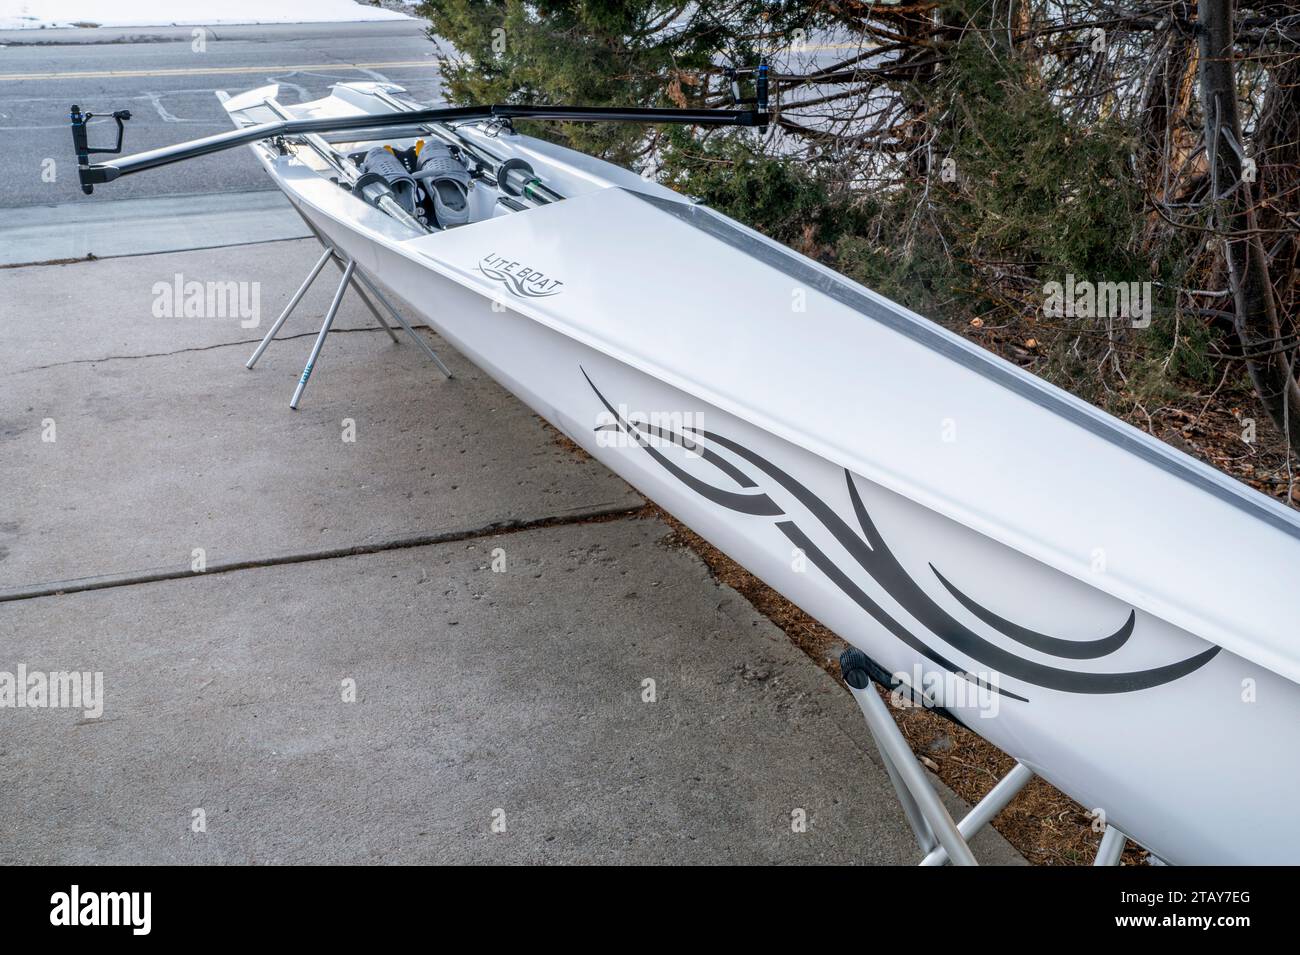 Fort Collins, CO, USA - December 2, 2023: Coastal rowing shell, Literace 1x by Litebox, on stands in a driveway. This boat, made in France, is designe Stock Photo